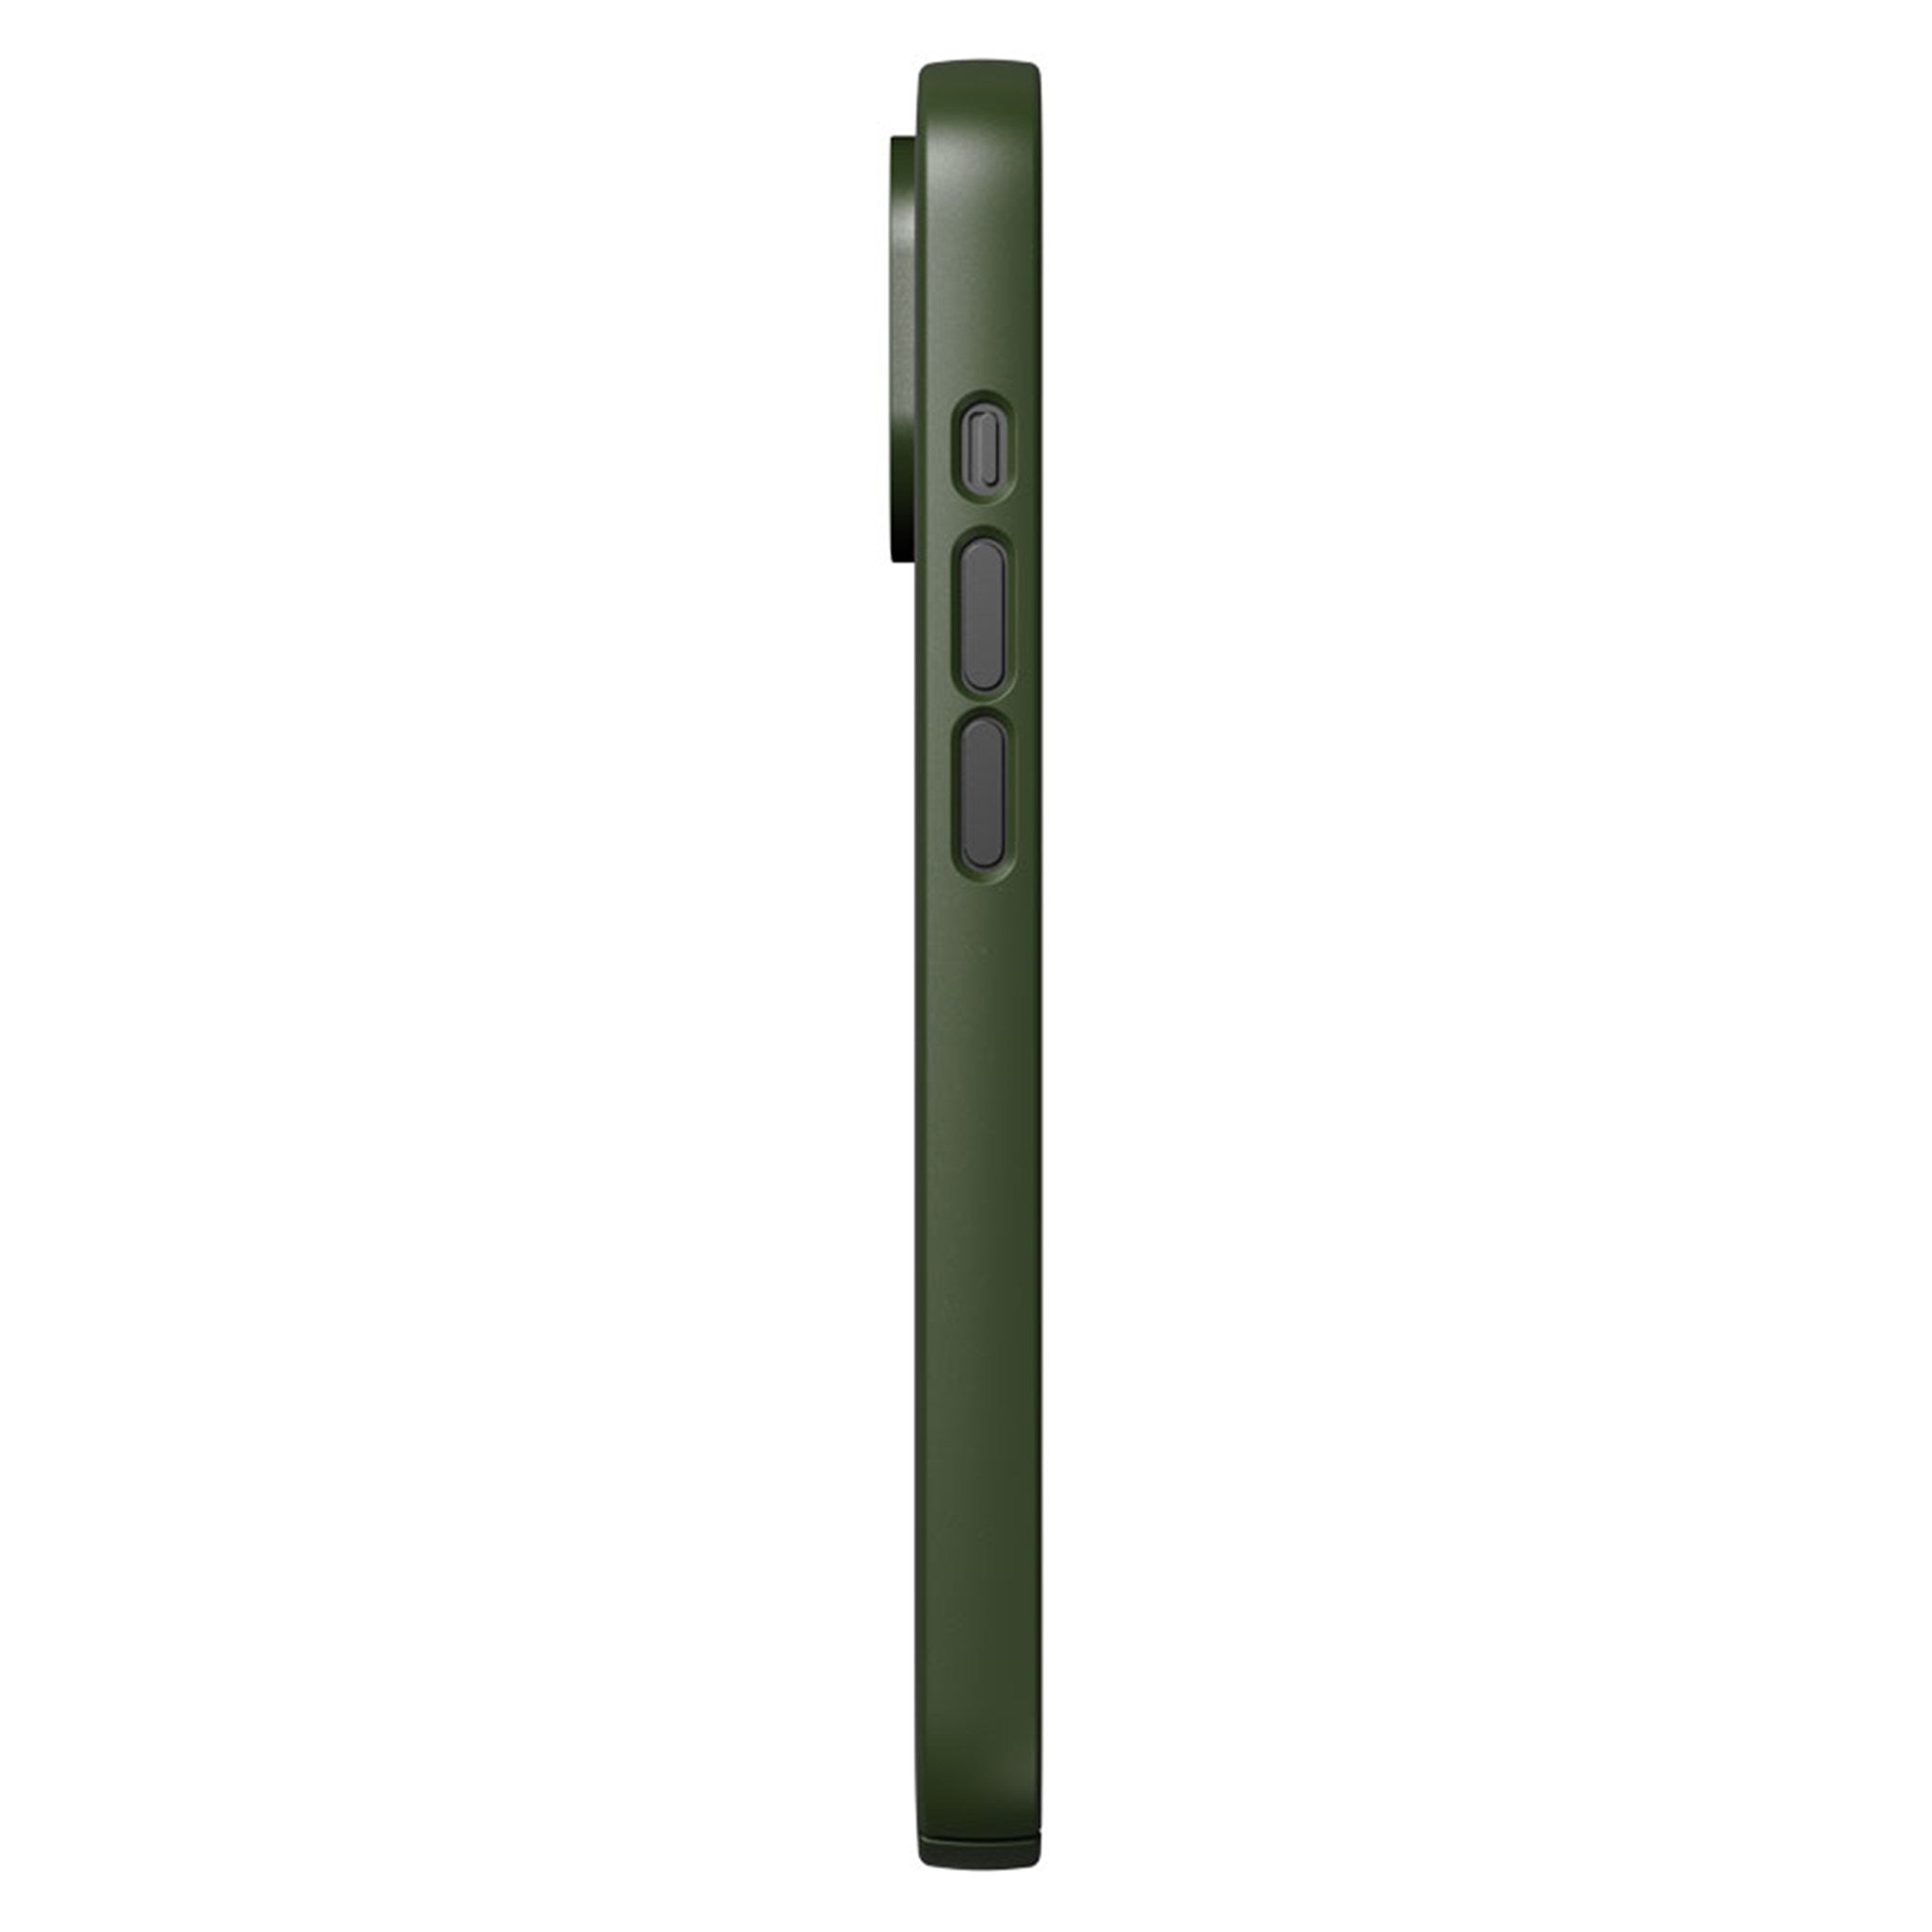 00-000-0052-0002_Nudient-iPhone-14-Pro-Thin-Cover-Pine-Green_03.jpg